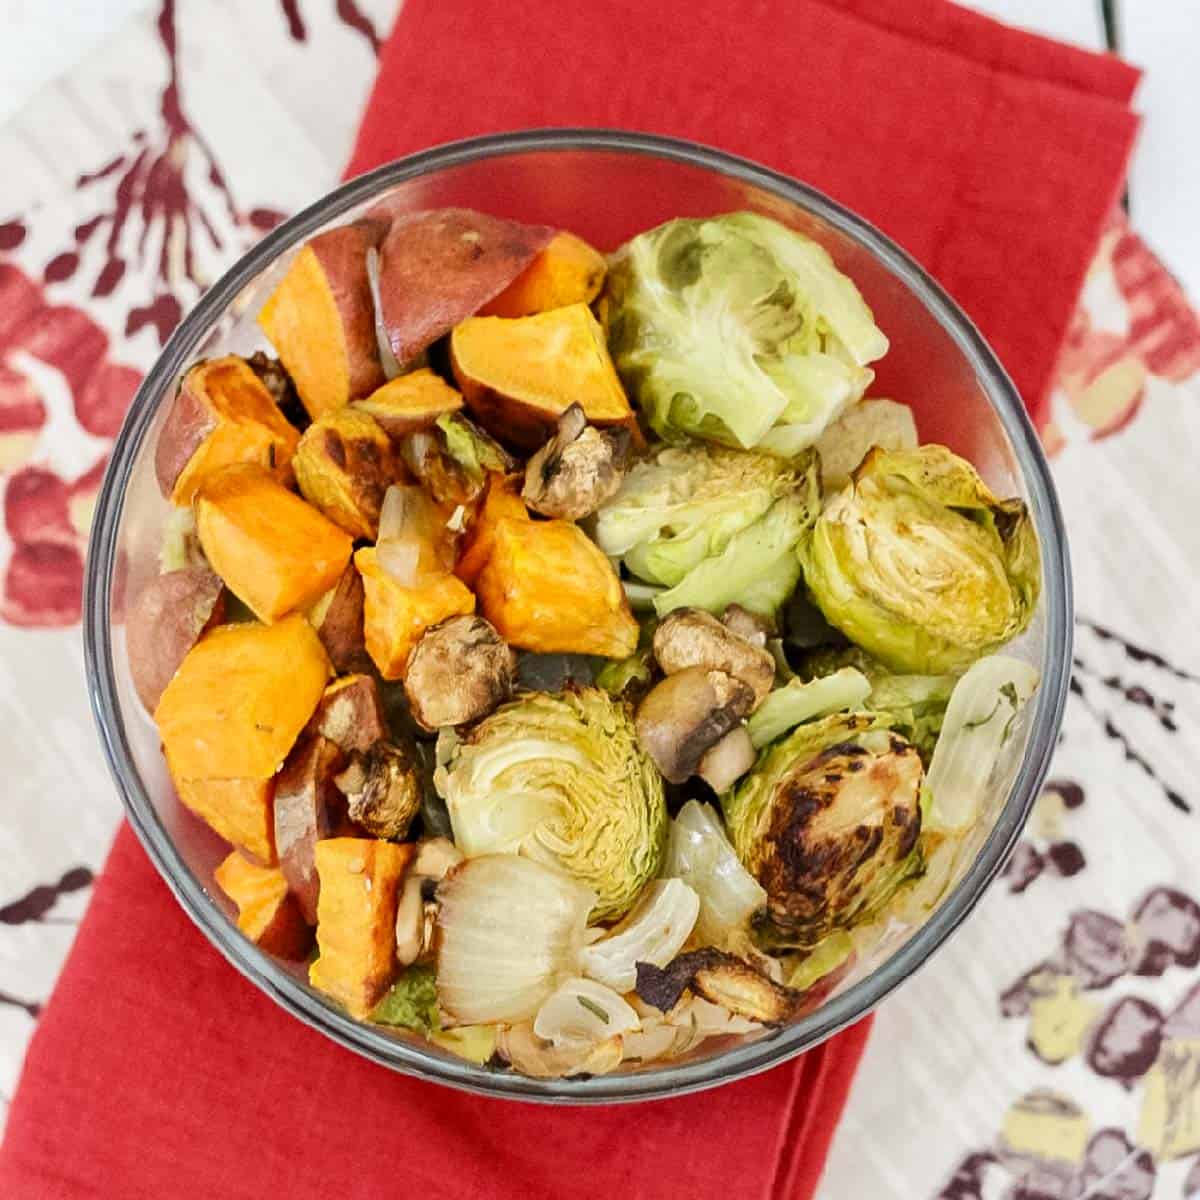 bowl of roasted onions, brussels sprouts, sweet potatoes, and mushrooms on a red napkin and a floral napkin